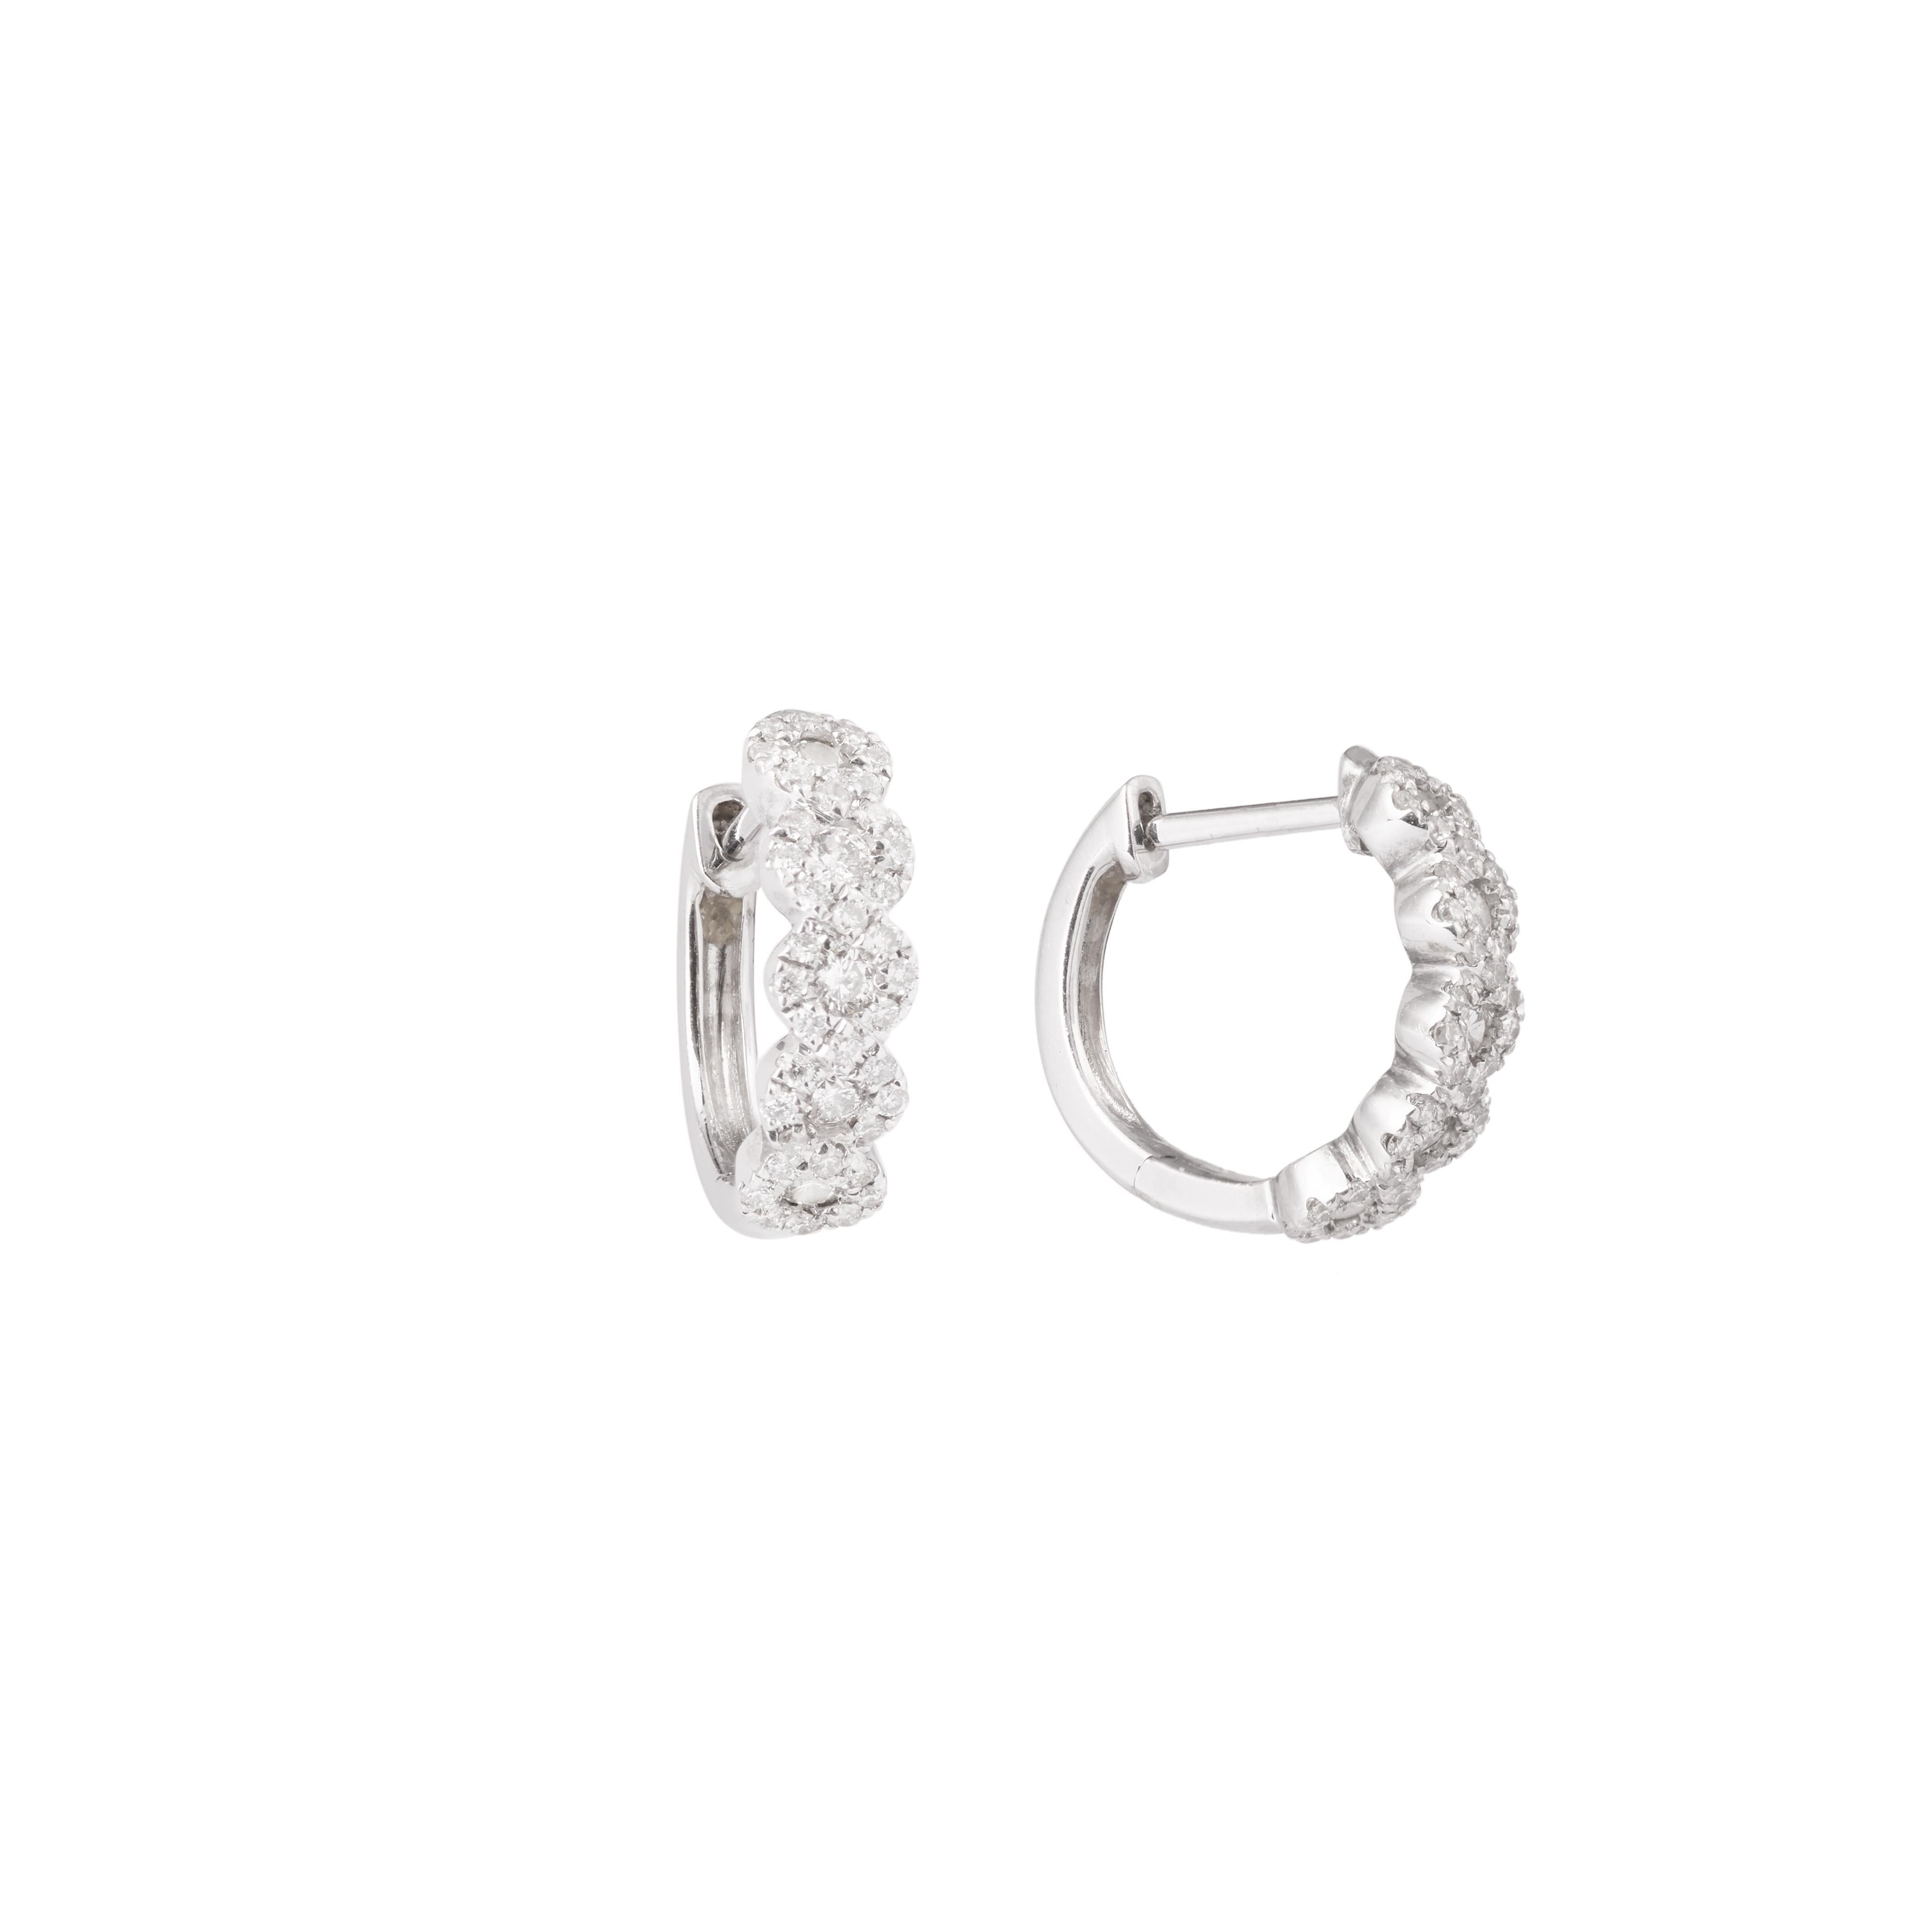 Small white gold hoop earrings set with brilliant cut diamonds.

dimensions : 1.28 x 0.37 cm ( 0,394 x 0 inch)

weight of diamonds: 0.42 carats

total weight: 2.60 g

18 carats white gold, 750/1000th